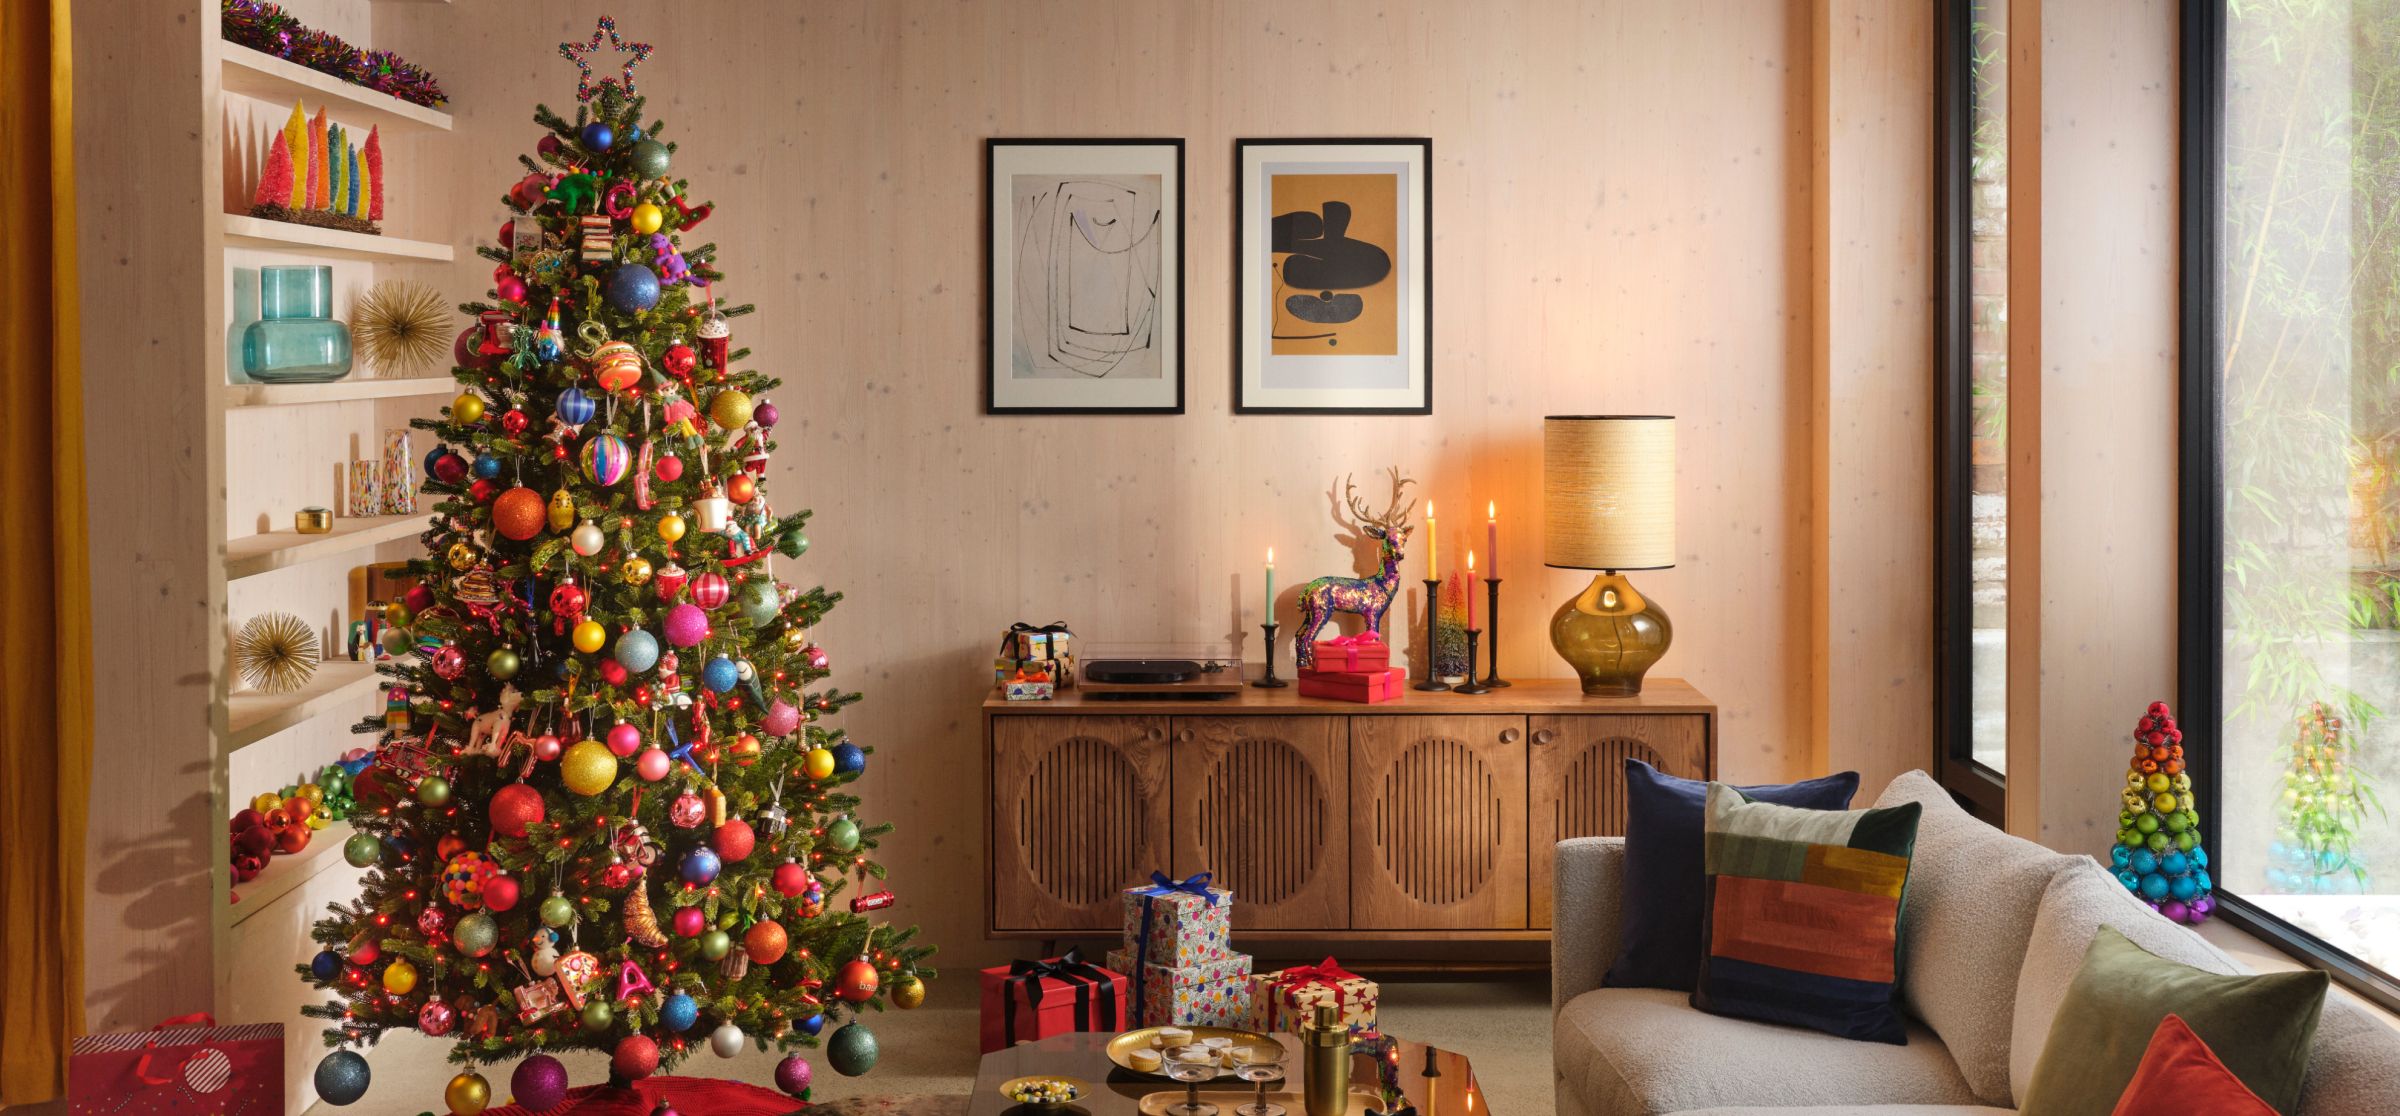 John Lewis & Partners Christams Decorating Ideas and Trends - Rainbow Time Capsule